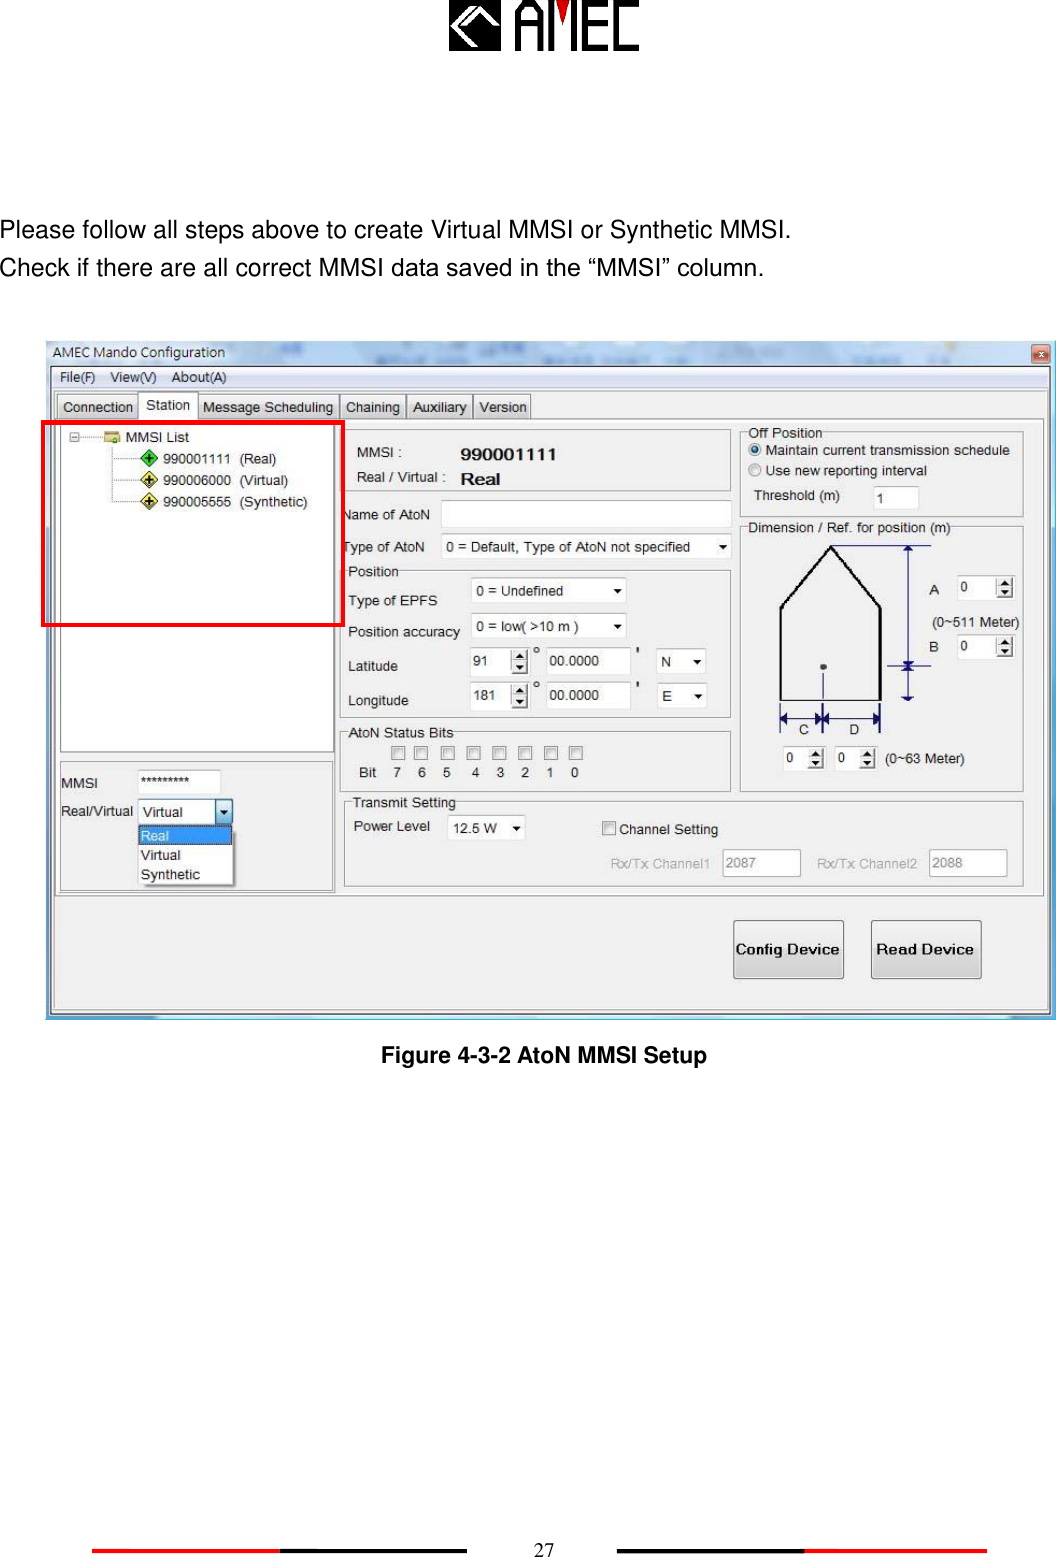    27    Please follow all steps above to create Virtual MMSI or Synthetic MMSI. Check if there are all correct MMSI data saved in the “MMSI” column.     Figure 4-3-2 AtoN MMSI Setup  